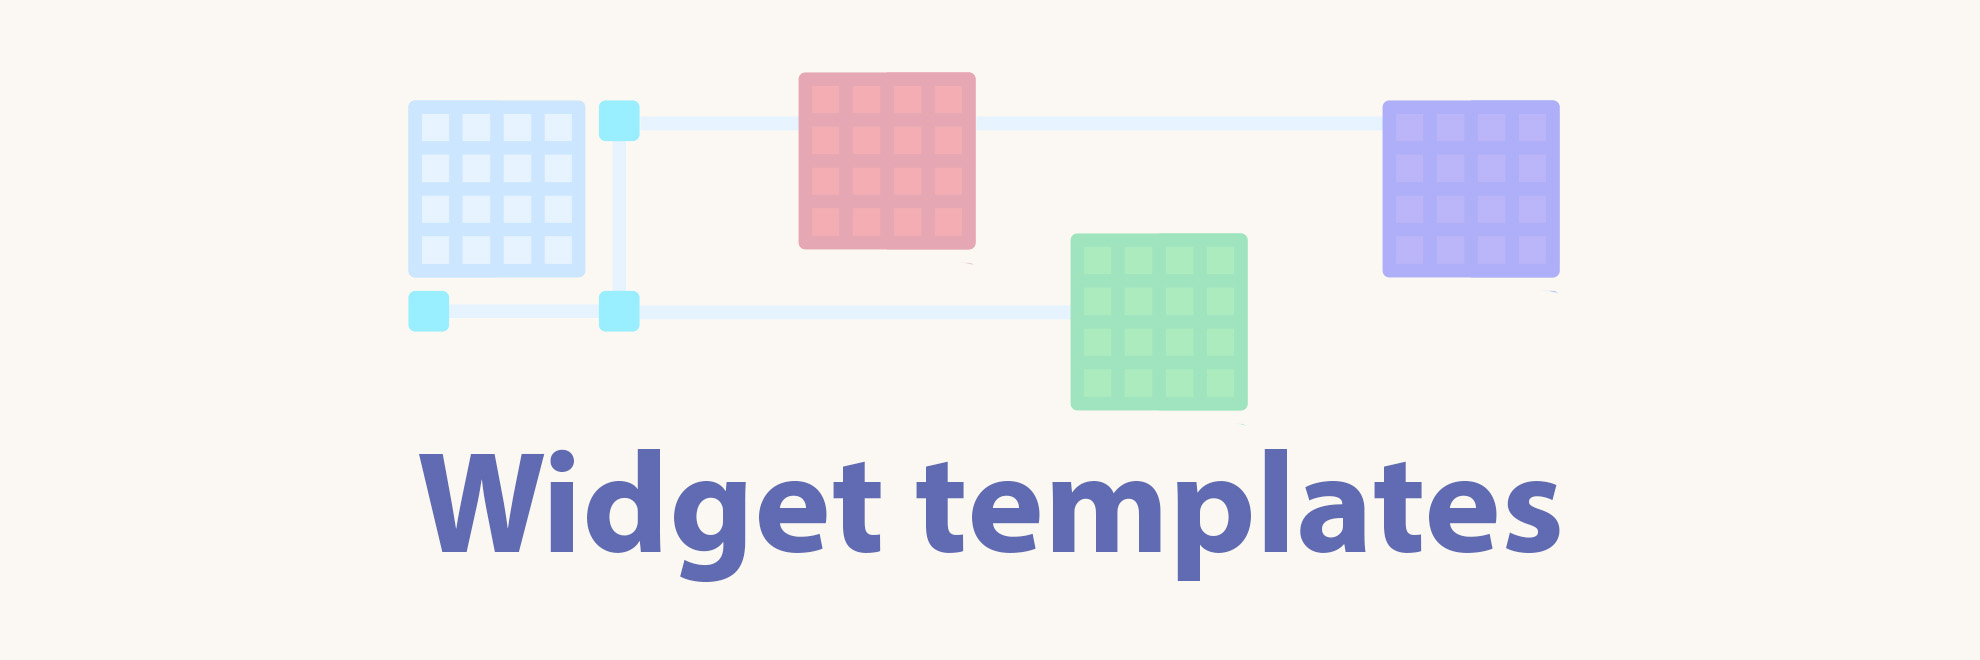 Illustration showing a block and its clones above the widget templates caption.